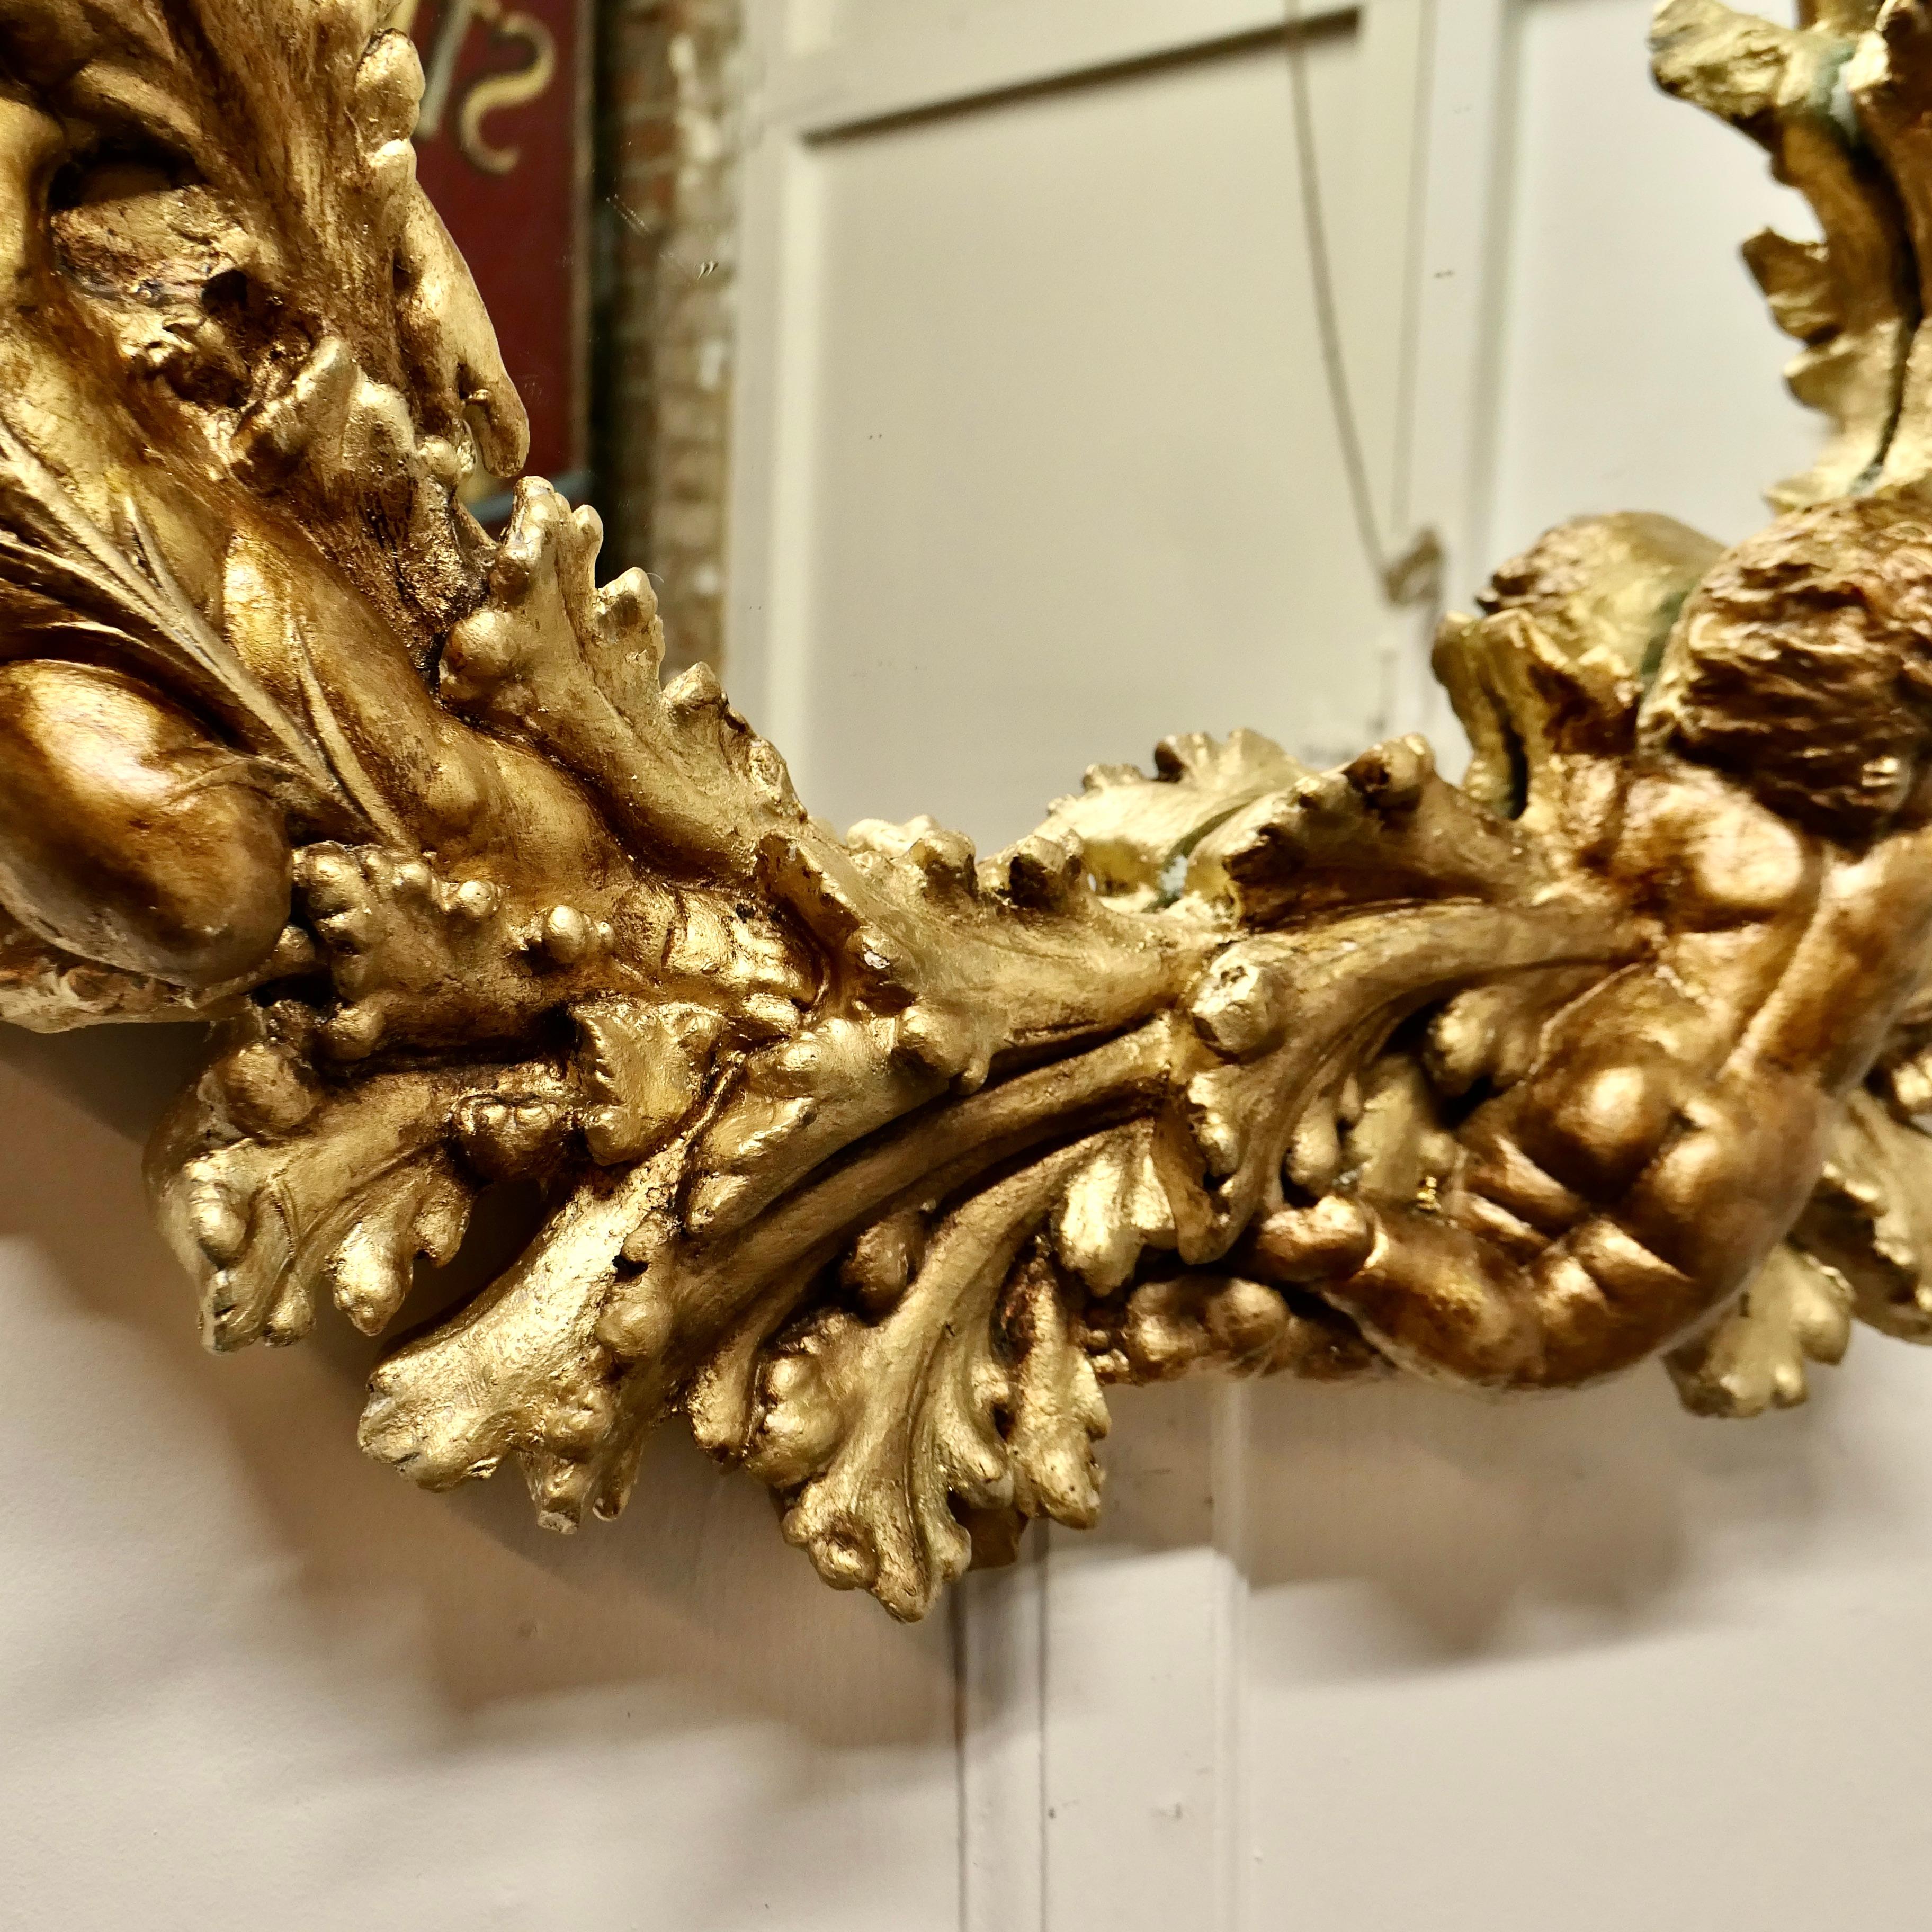 A Superb 19th Century Italian Gilt Wreath Mirror

This is a charming piece, the Mirror has a Gilt frame., which has a very elaborate 9” wide circular frame mounted with Cherubs and Acanthus Leaves
An enchanting piece especially for the festive time